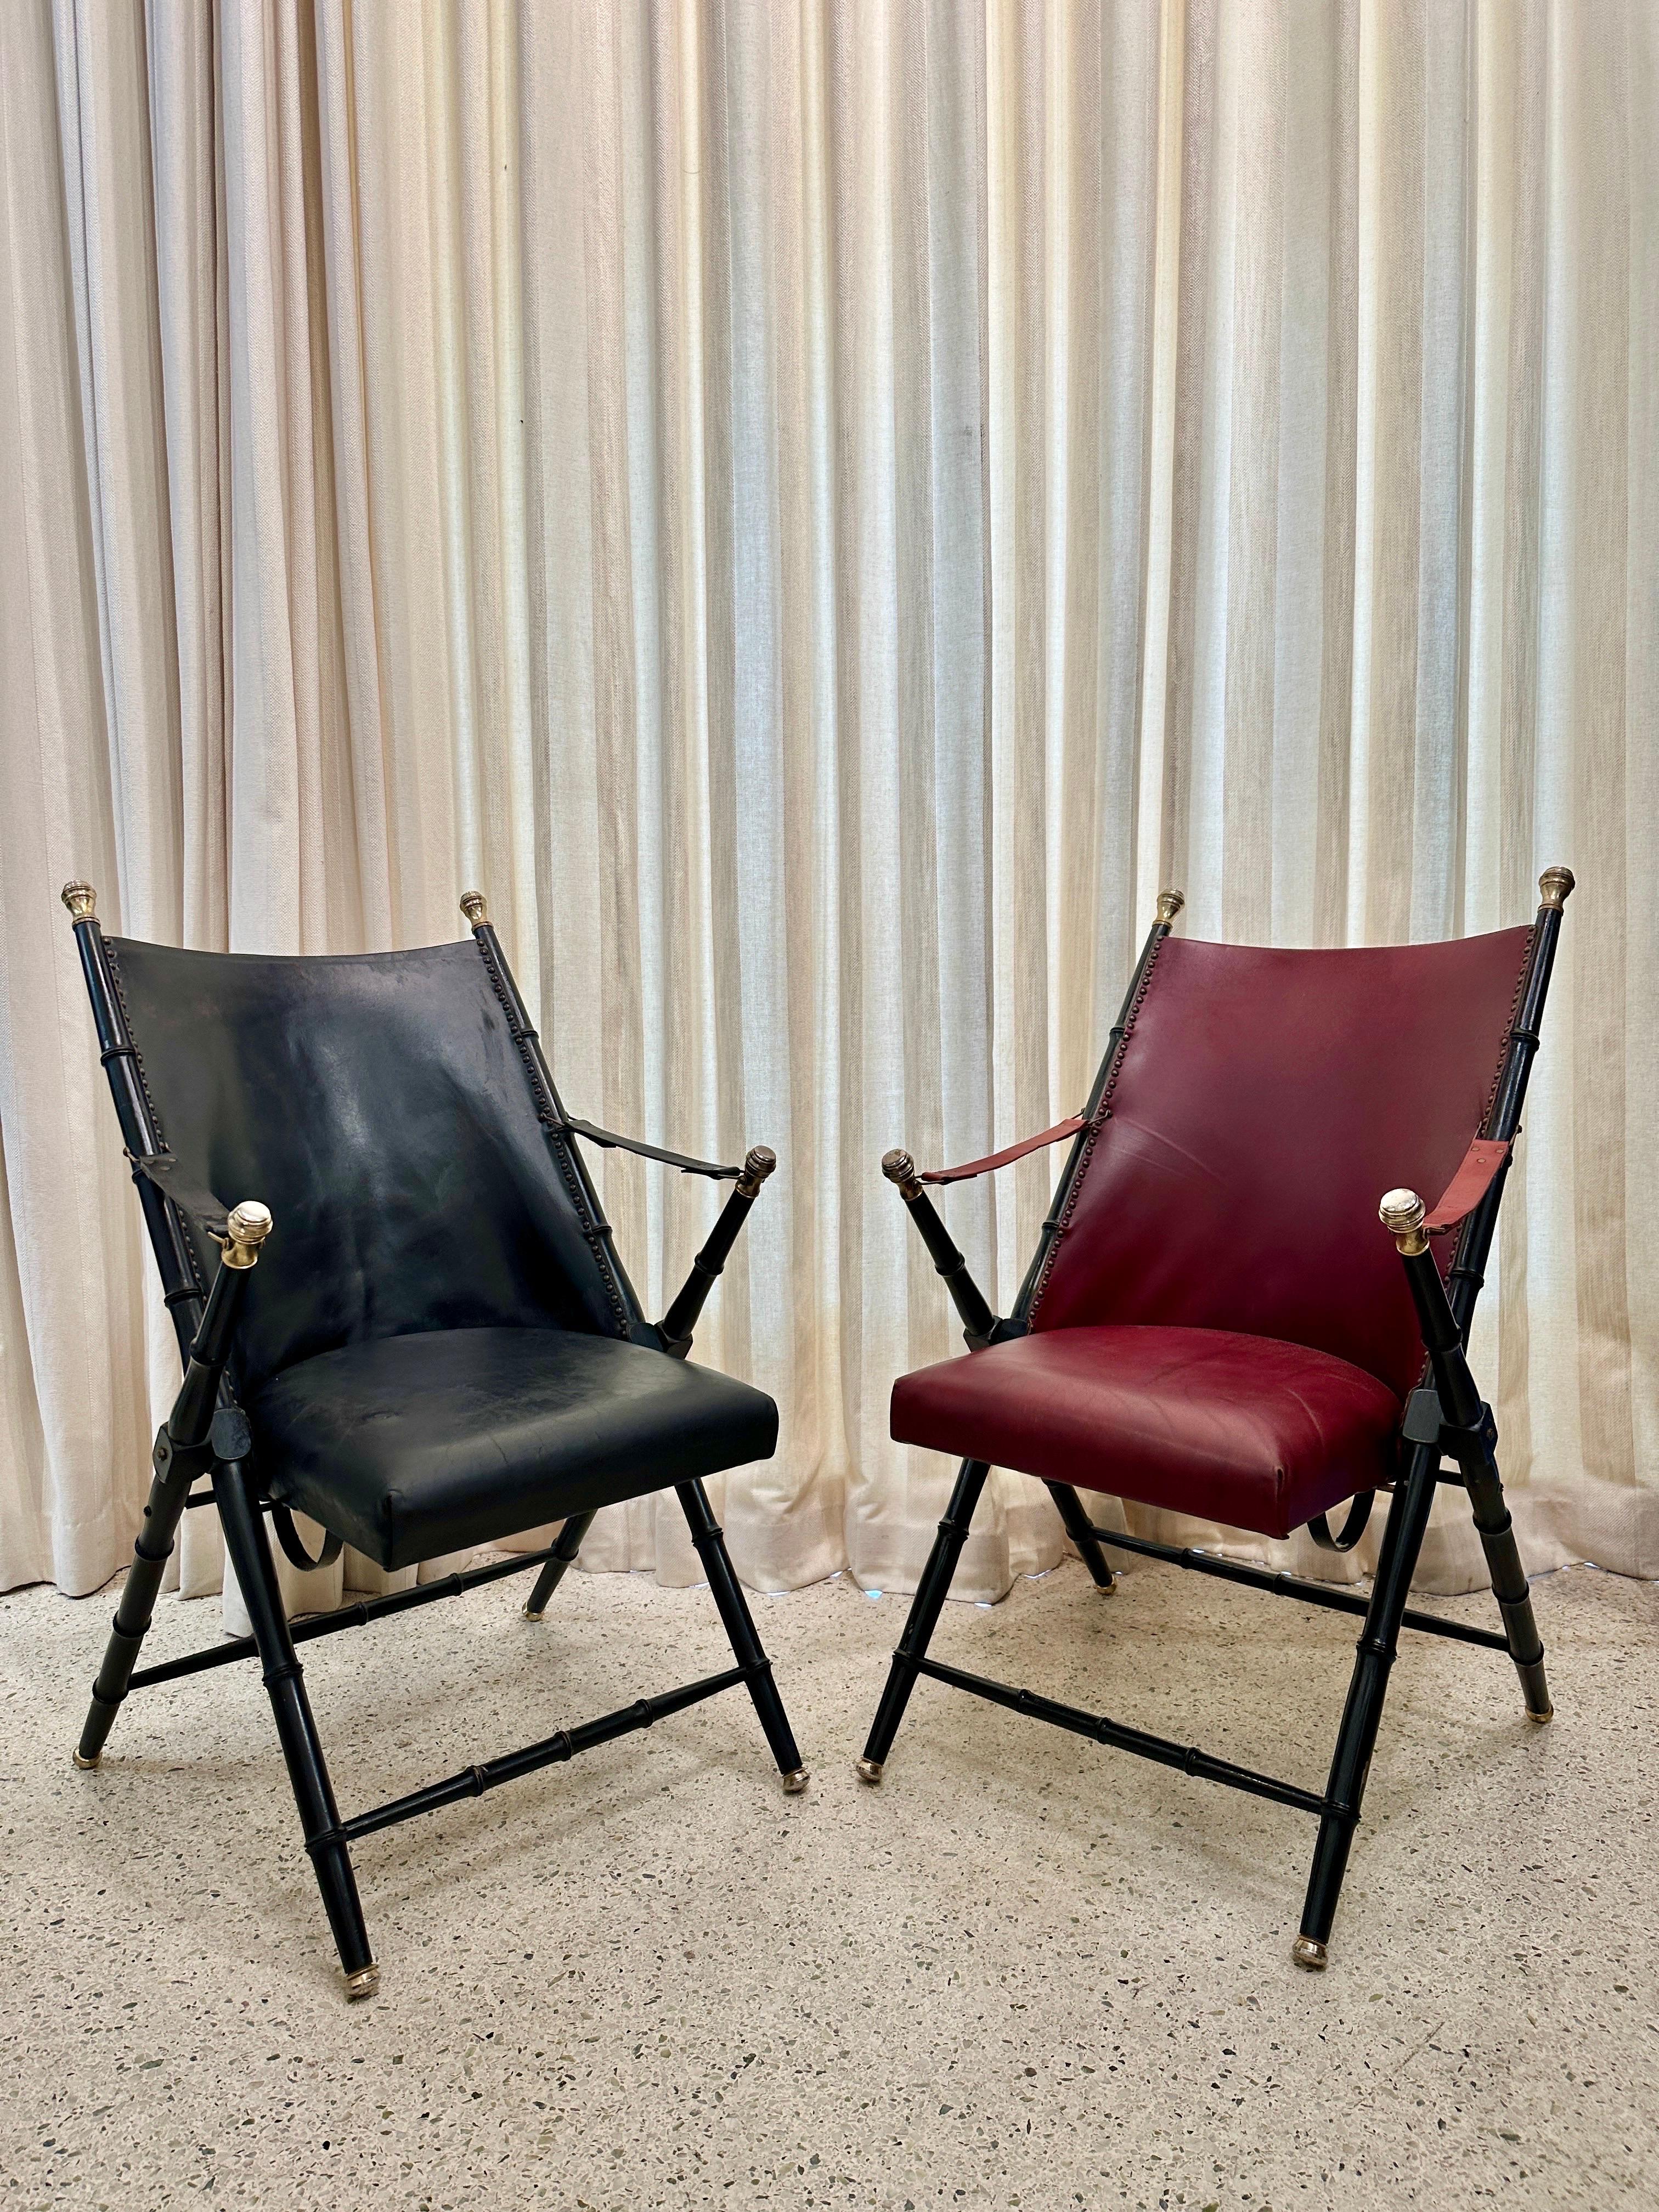 Mid-20th Century Pair of French Campaign-Style Leather Folding Chairs with Faux-Bamboo Frames For Sale